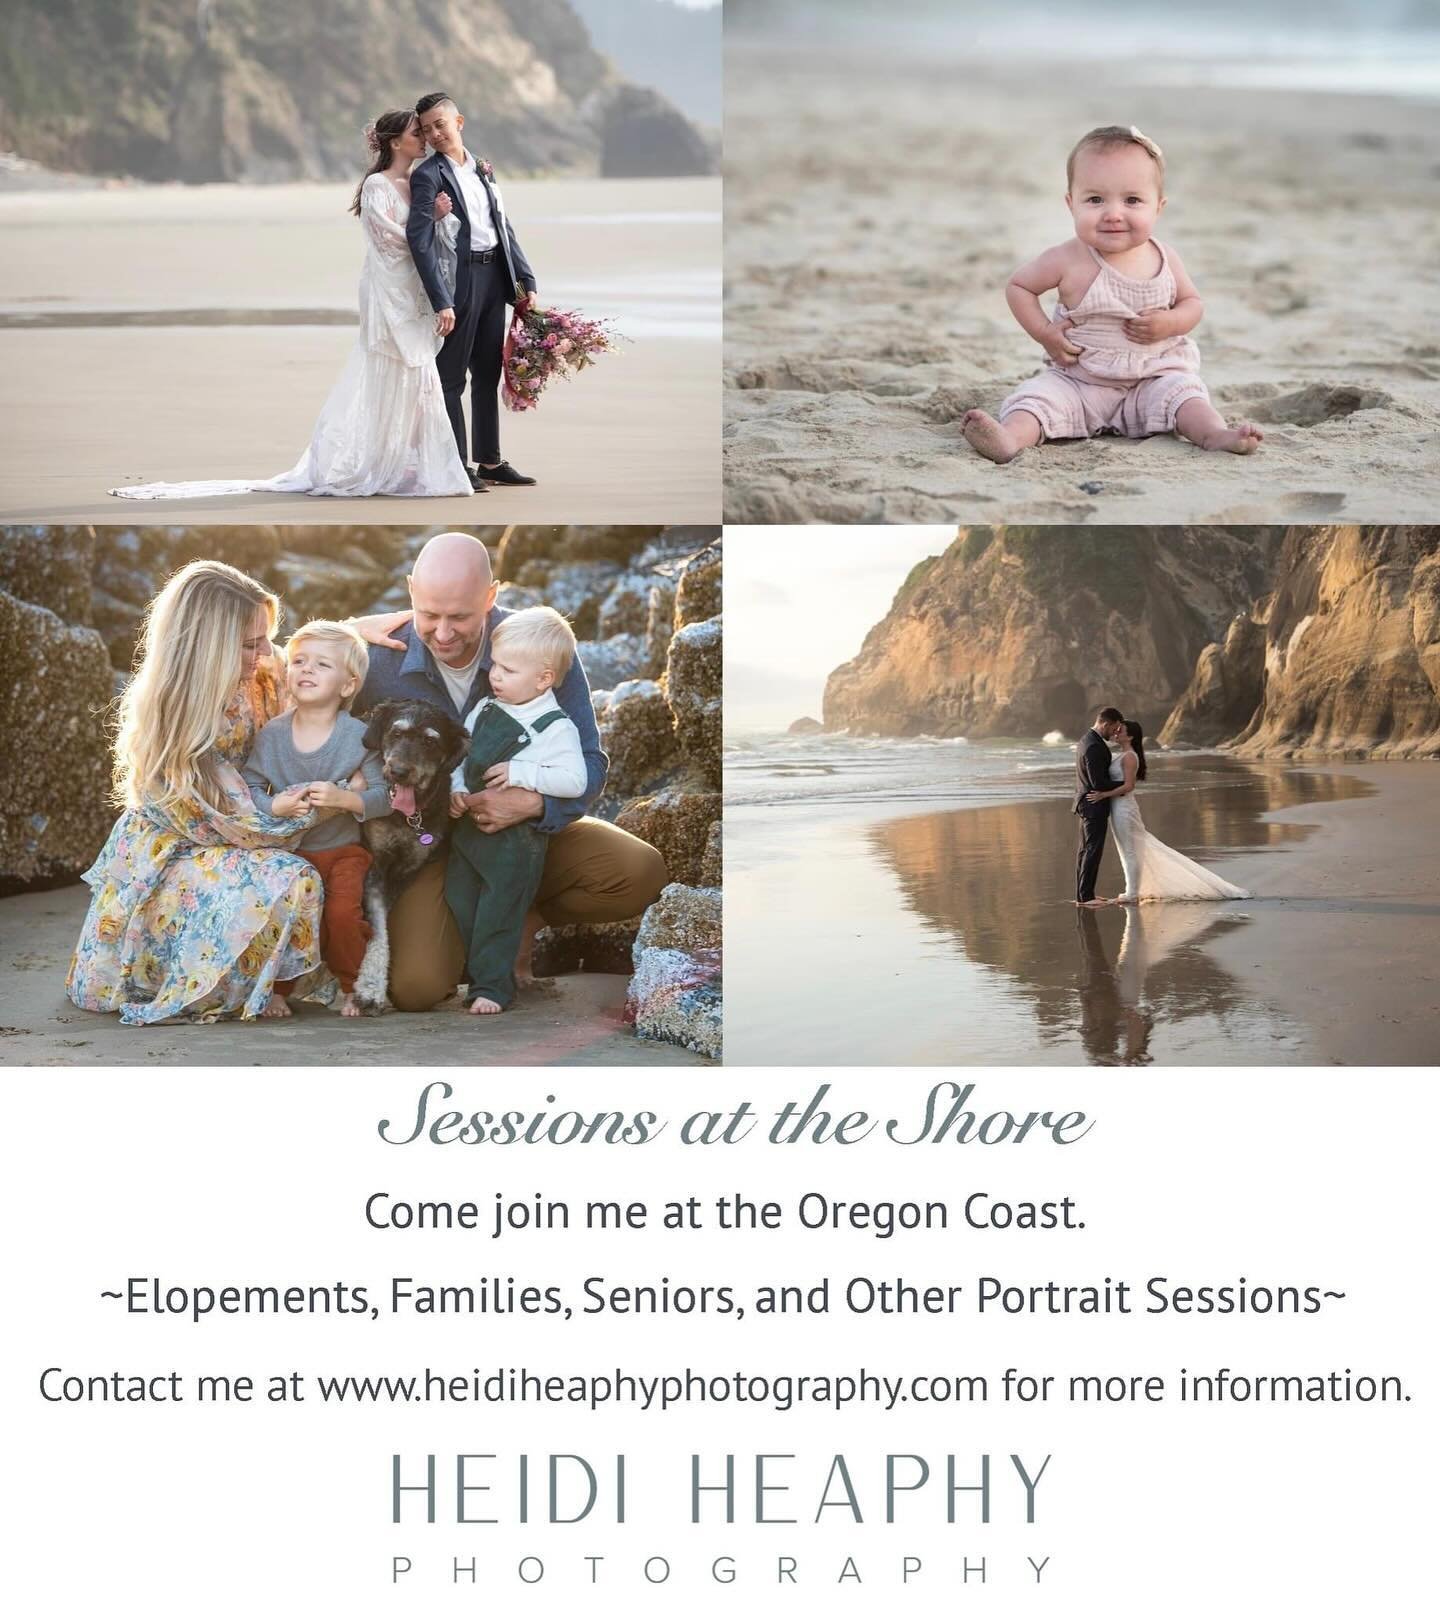 I&rsquo;m in the thick of editing client sessions and baseball games. I love it so much when the busy begins. Make sure to contact me soon if you are traveling to the Oregon Coast this year. I would love to capture your memories there.